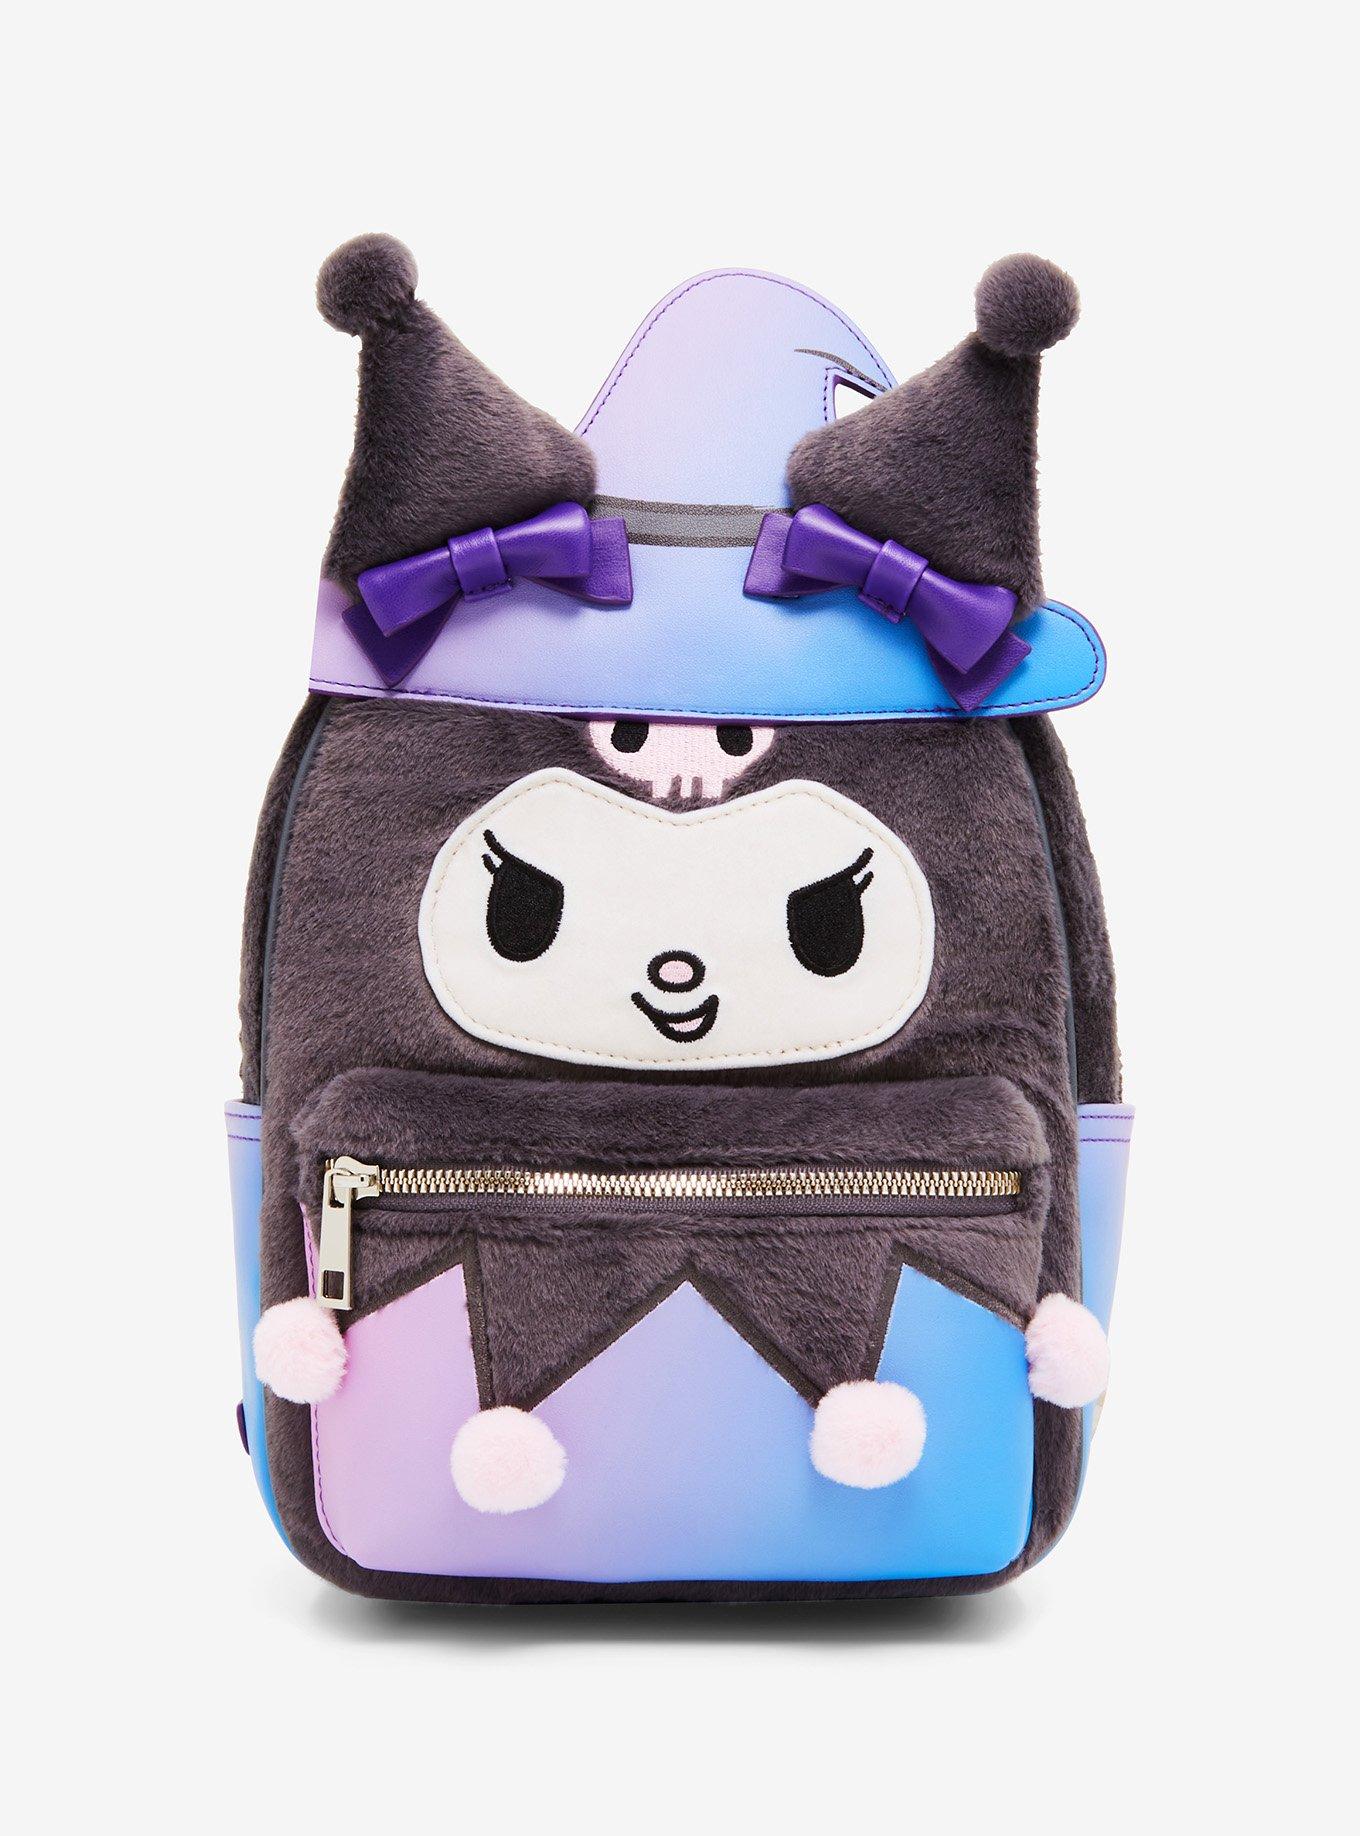 Disney Maleficent Backpack High Quality Anime Witch Cartoon